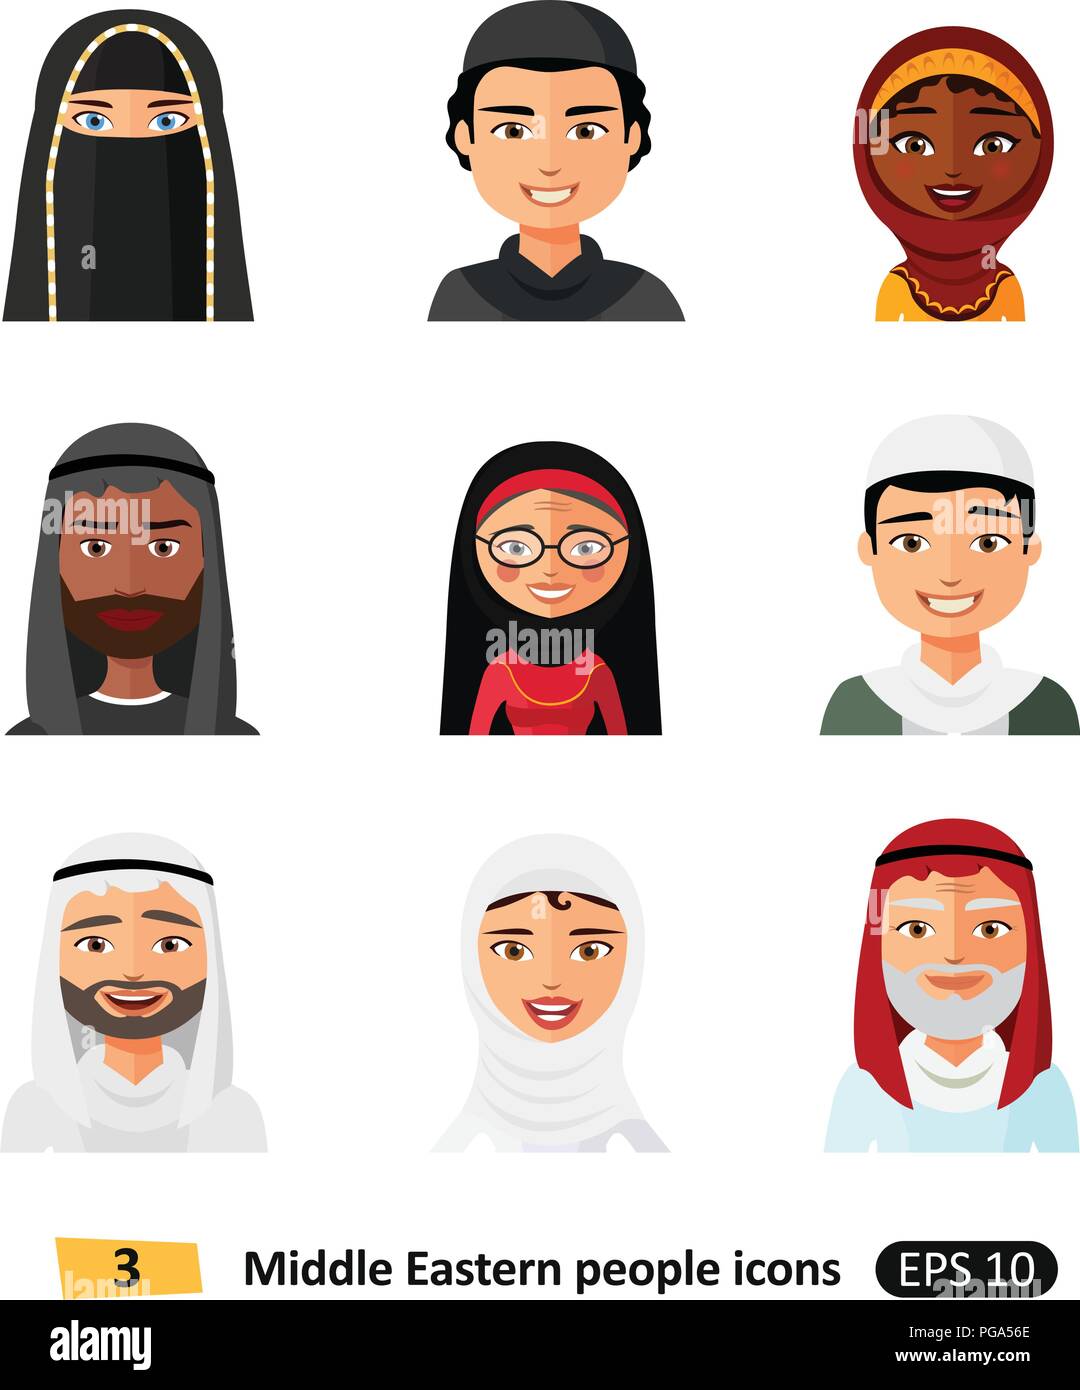 Muslim arab people avatars characters icons set in flat style isolated on white different arabic ethnic man and woman users faces in traditional cloth Stock Vector